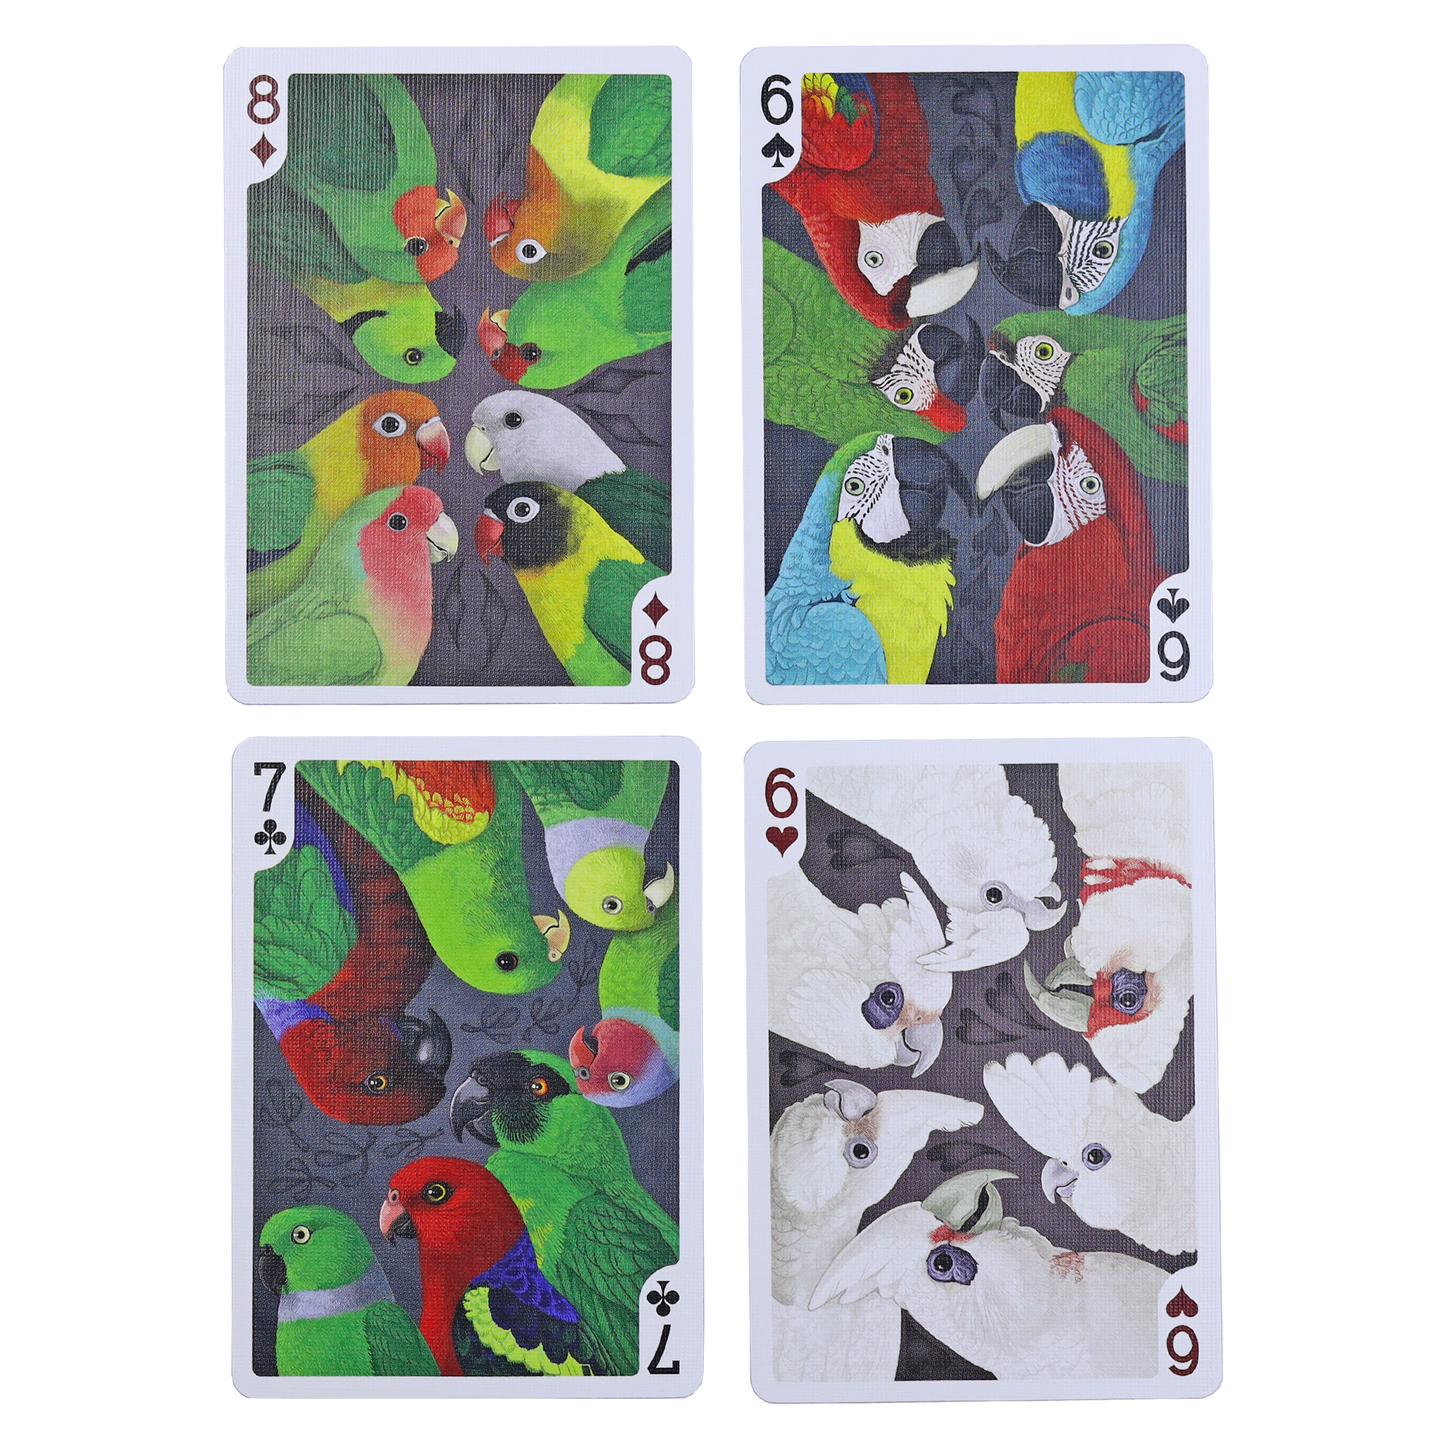 Parrot Bicycle Playing Cards